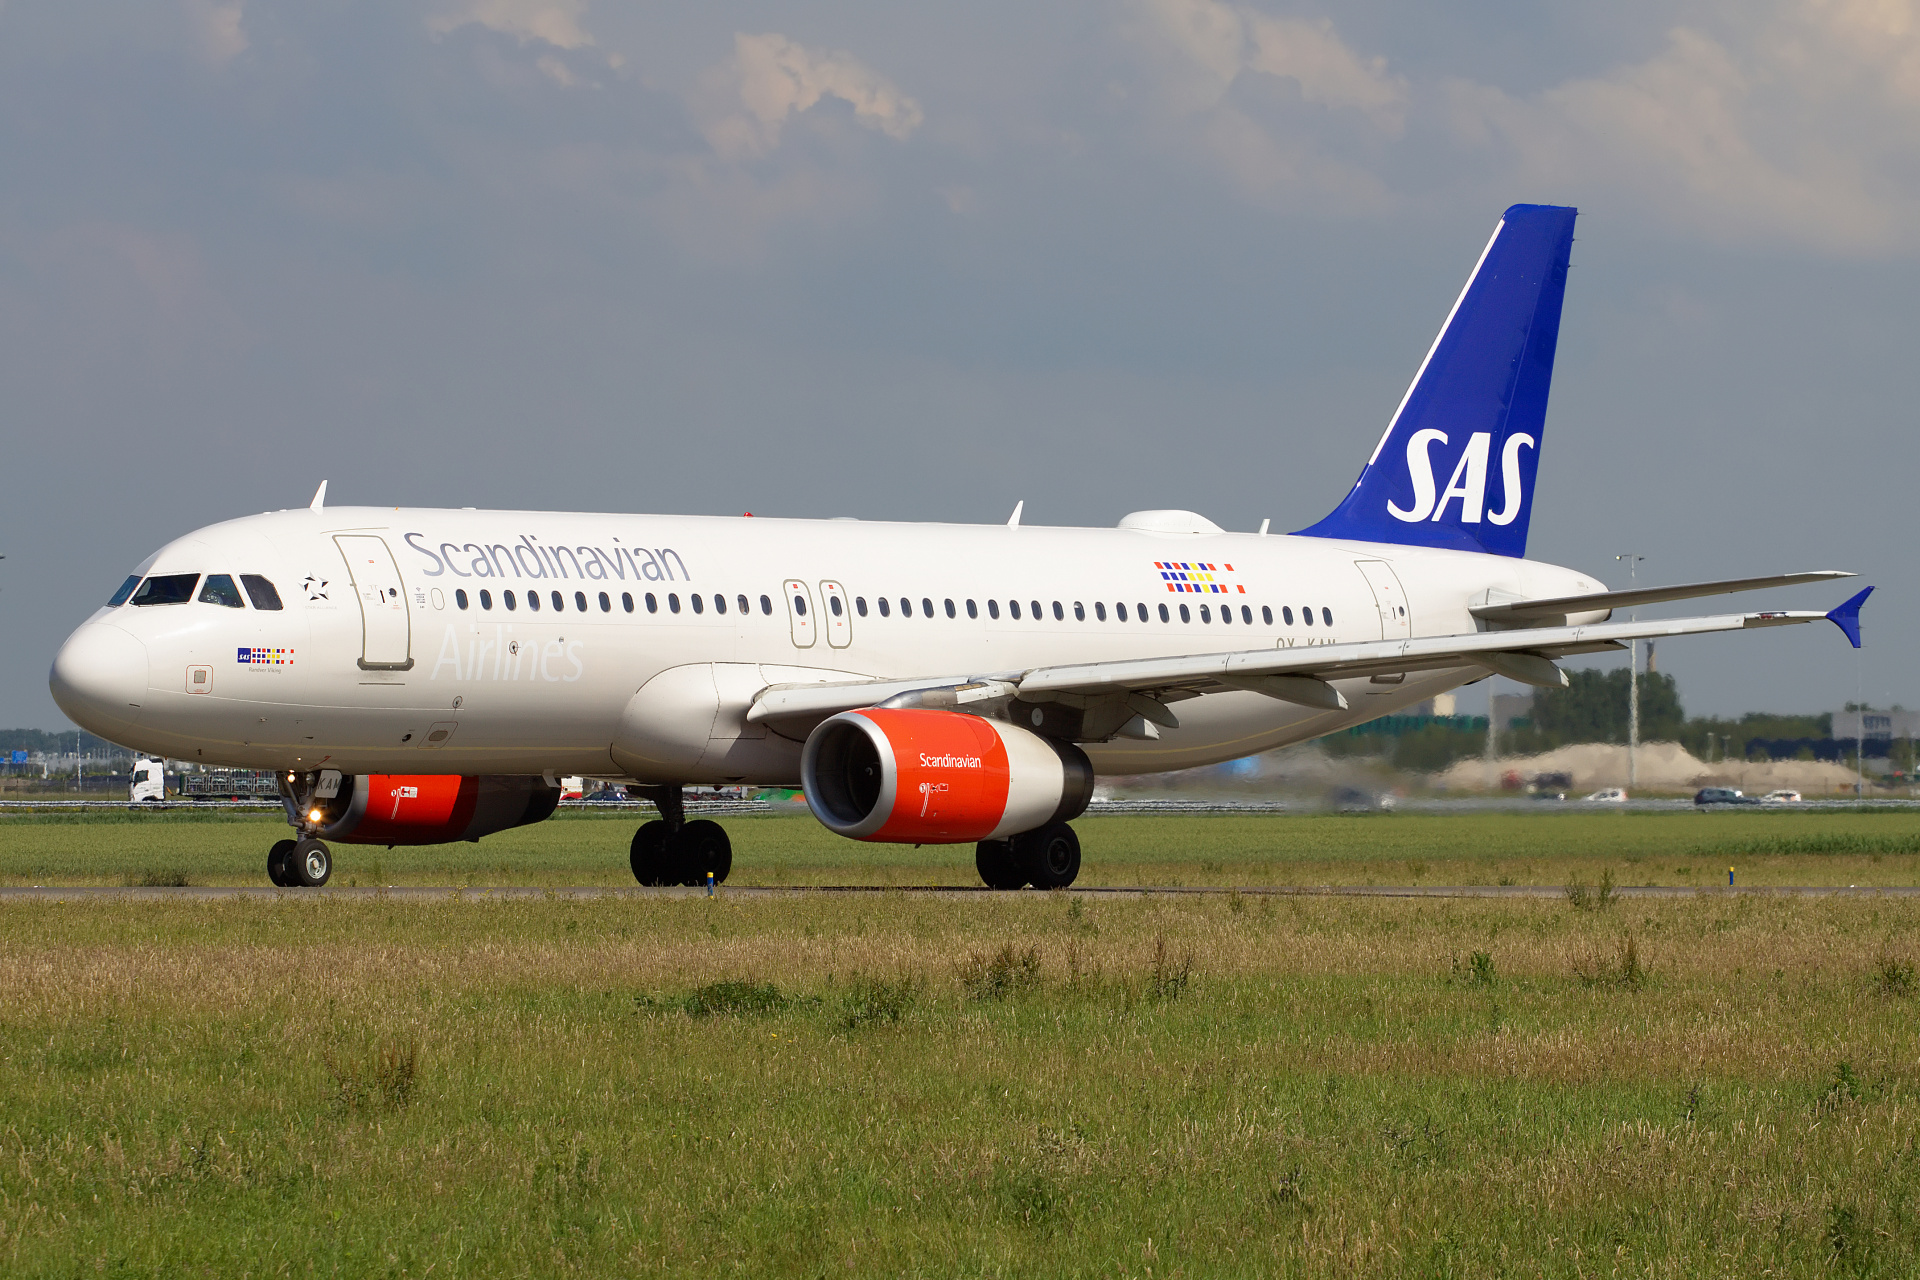 OY-KAL, SAS Scandinavian Airlines System (Samoloty » Spotting na Schiphol » Airbus A320-200)